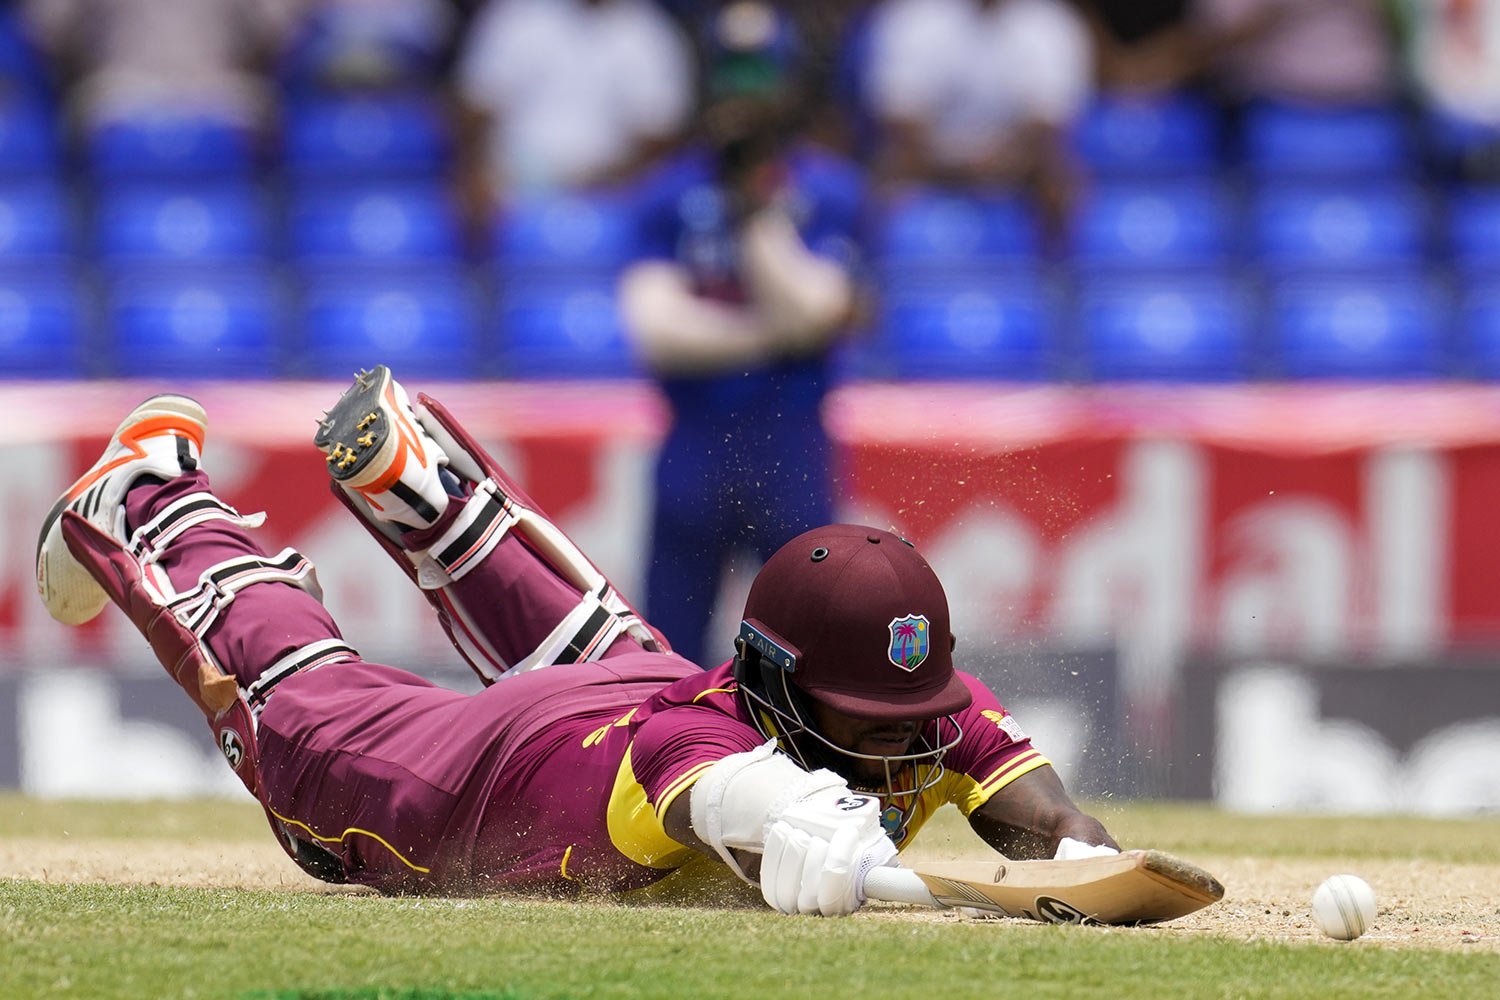  West Indies' Kyle Mayers safely makes his ground during the third T20 cricket match against India at Warner Park in Basseterre, St. Kitts and Nevis, Tuesday, Aug. 2, 2022. (AP Photo/Ricardo Mazalan) 